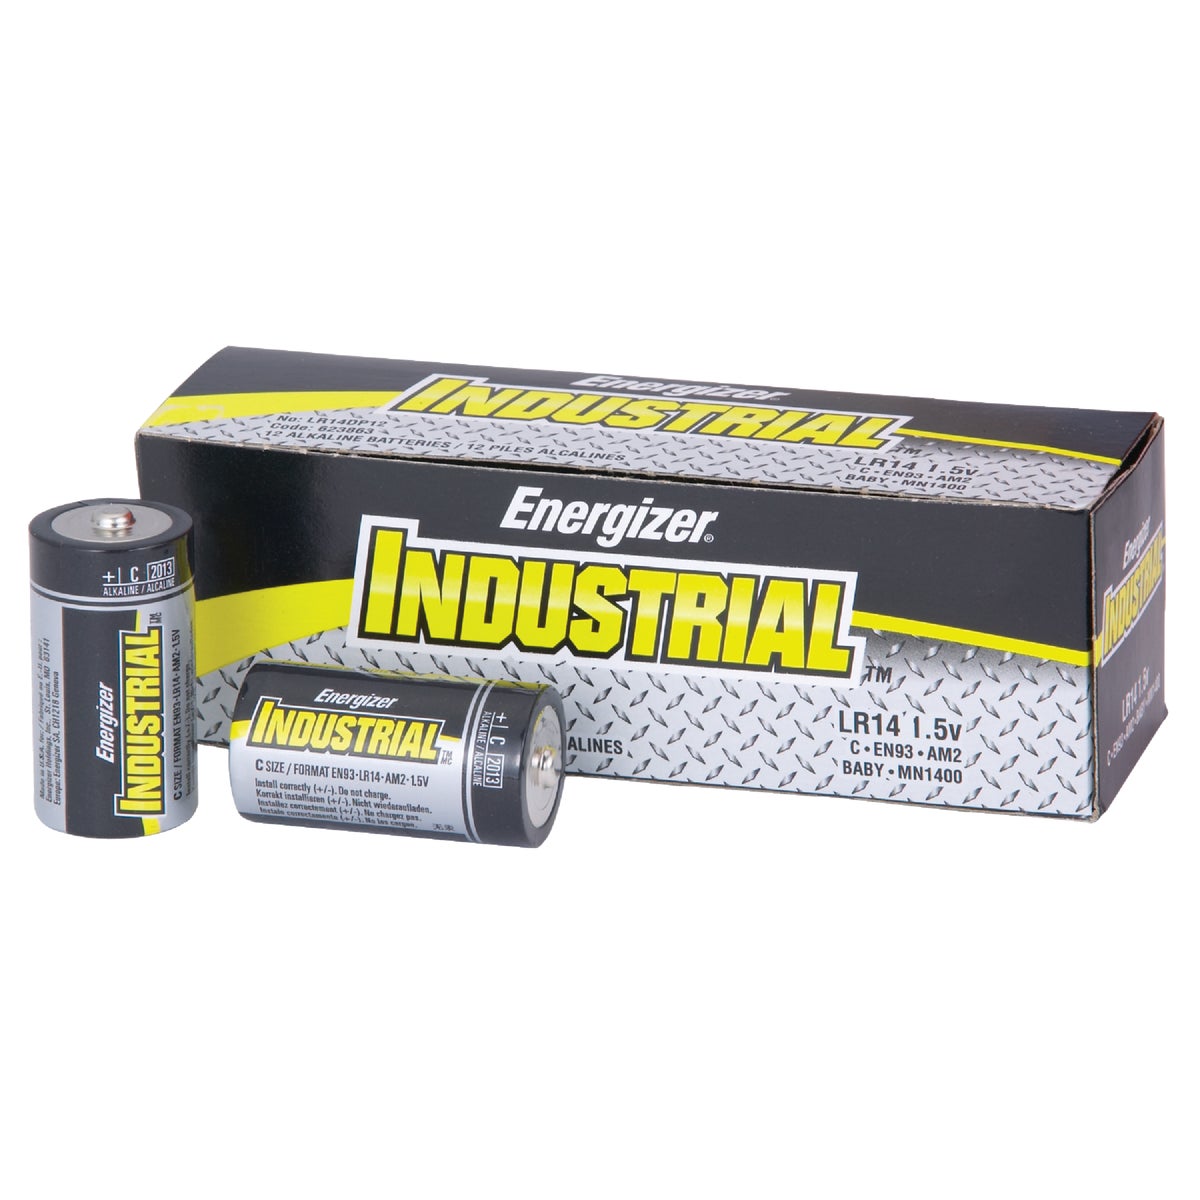 Item 825174, Industrial strength batteries featuring zinc-manganese dioxide chemistry.